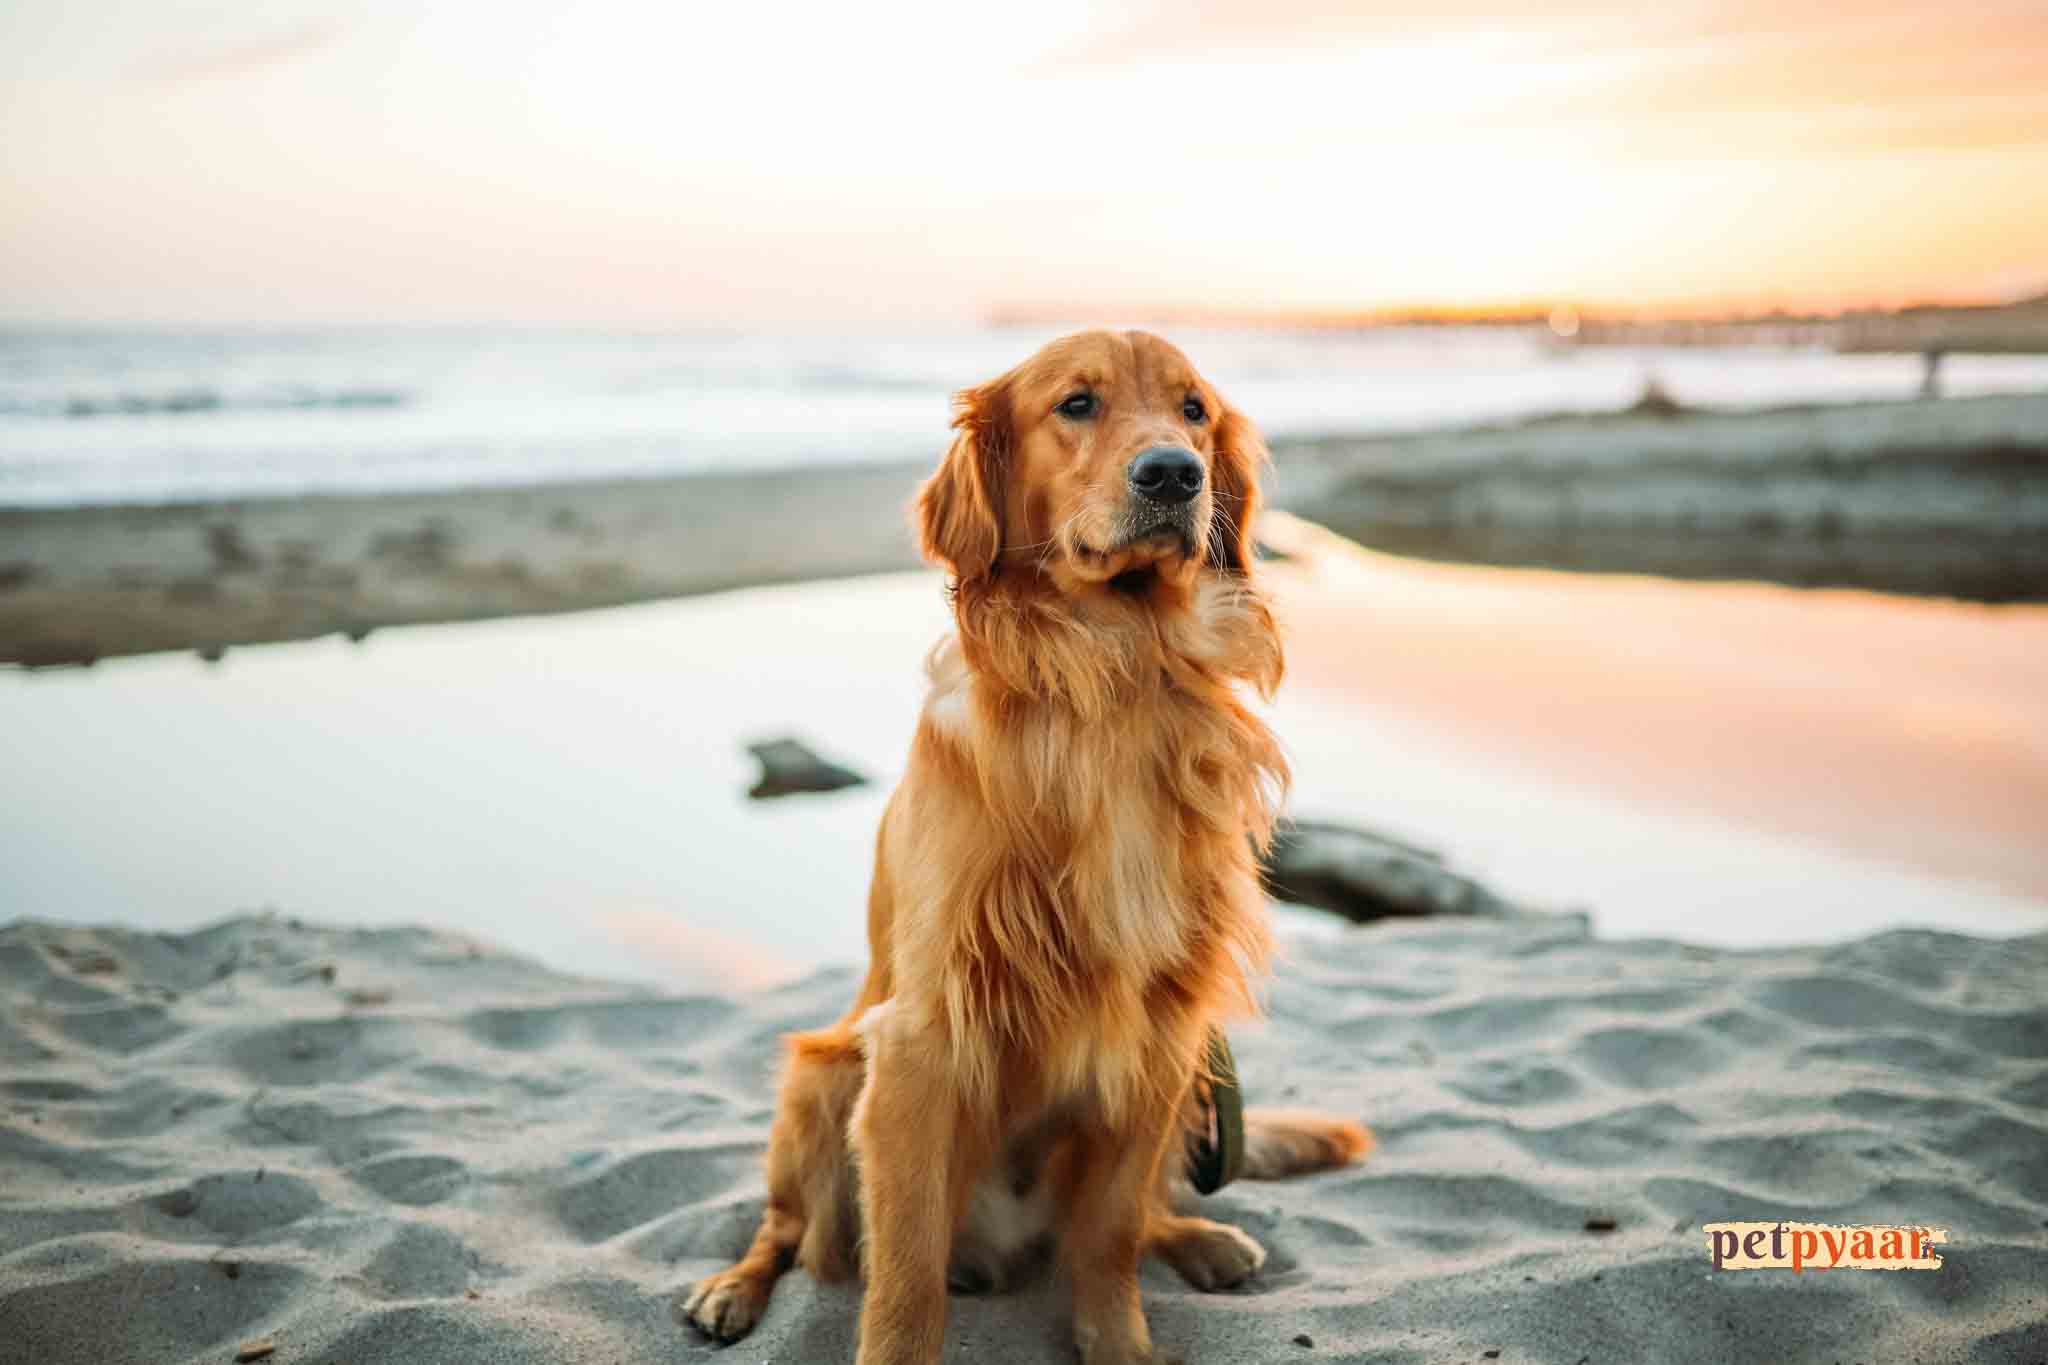 "Golden Retriever Diet and Obesity Prevention in India: Expert Tips for Managing Weight"